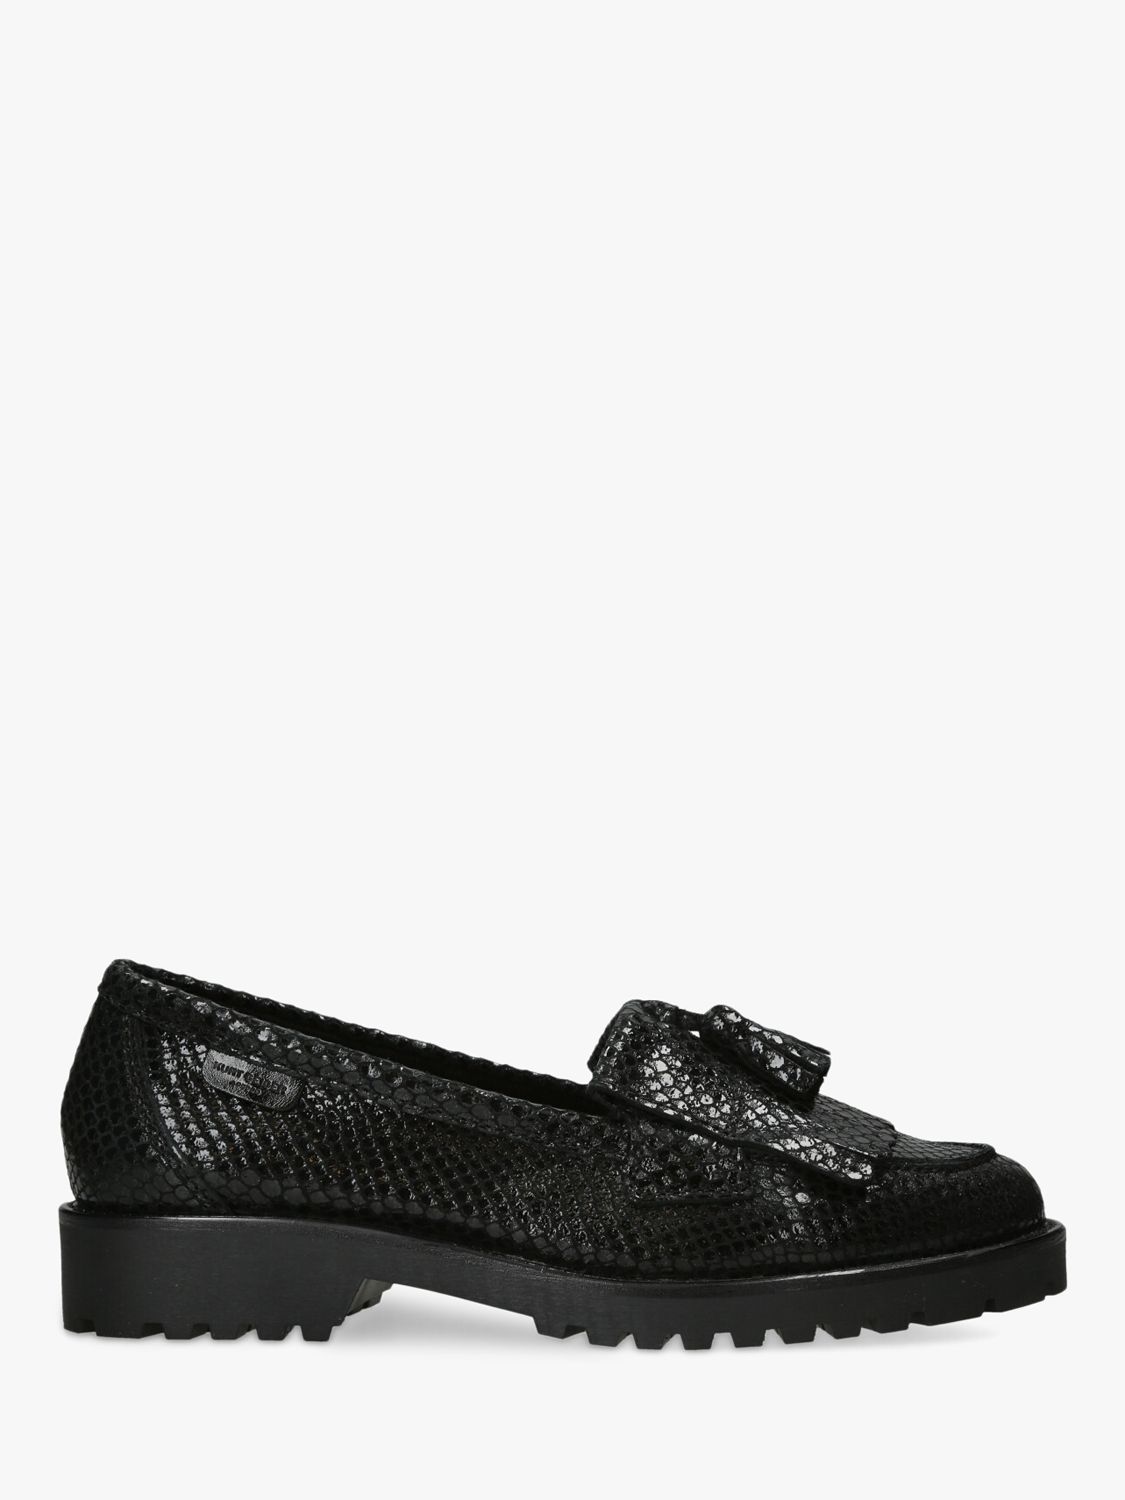 Kurt Geiger London Olympia Leather Loafers at John Lewis & Partners